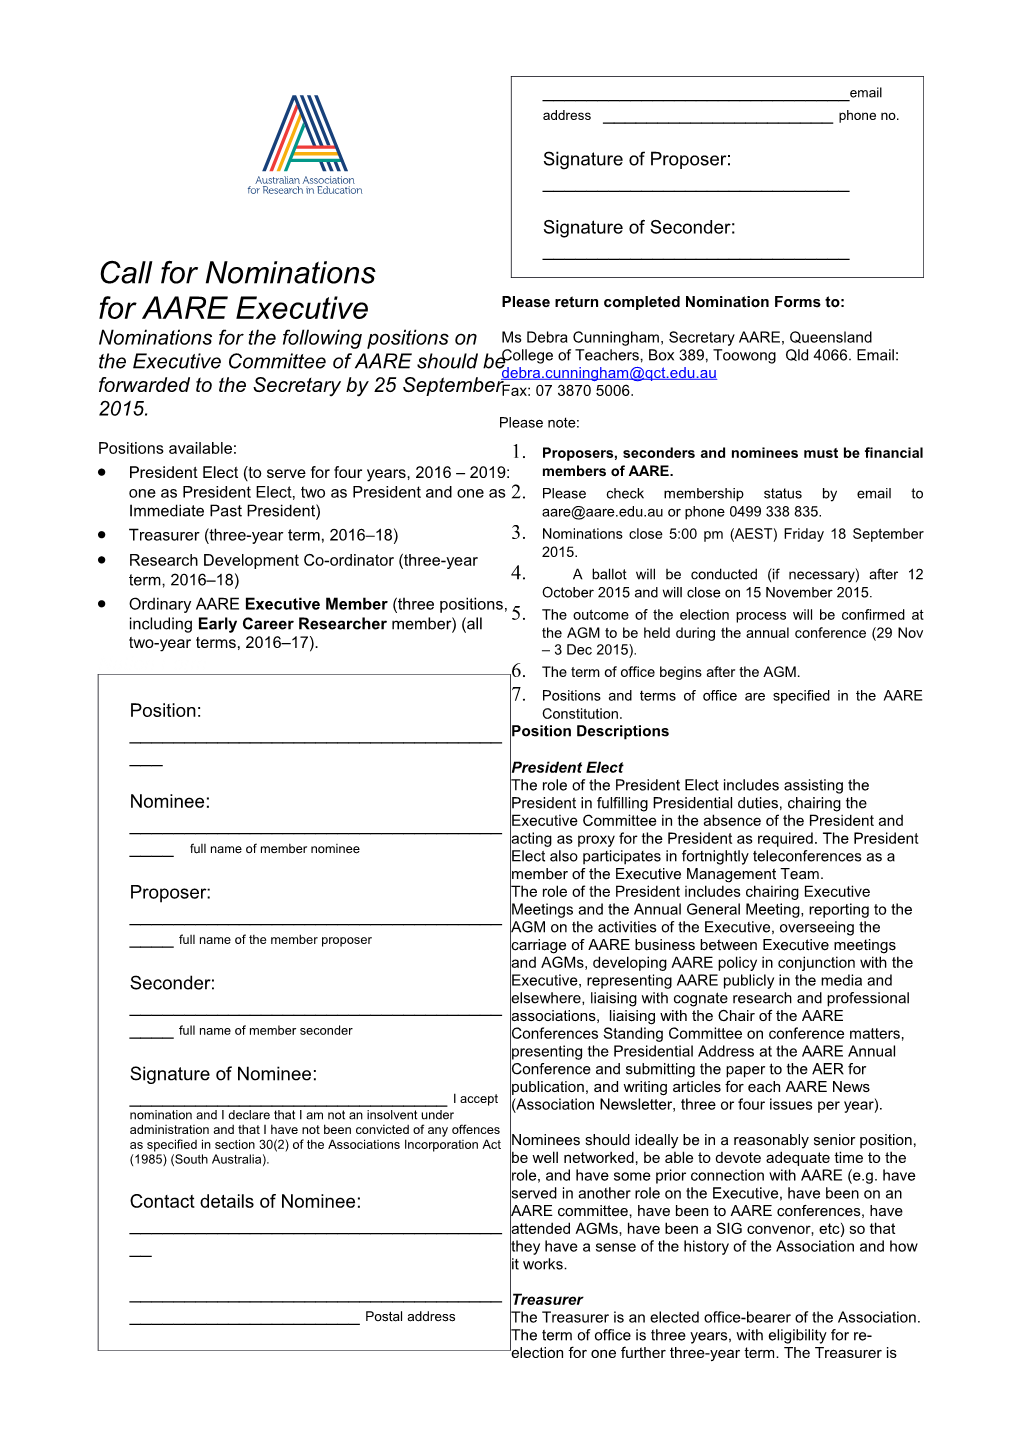 Call for Nominations for AARE Executive 2007